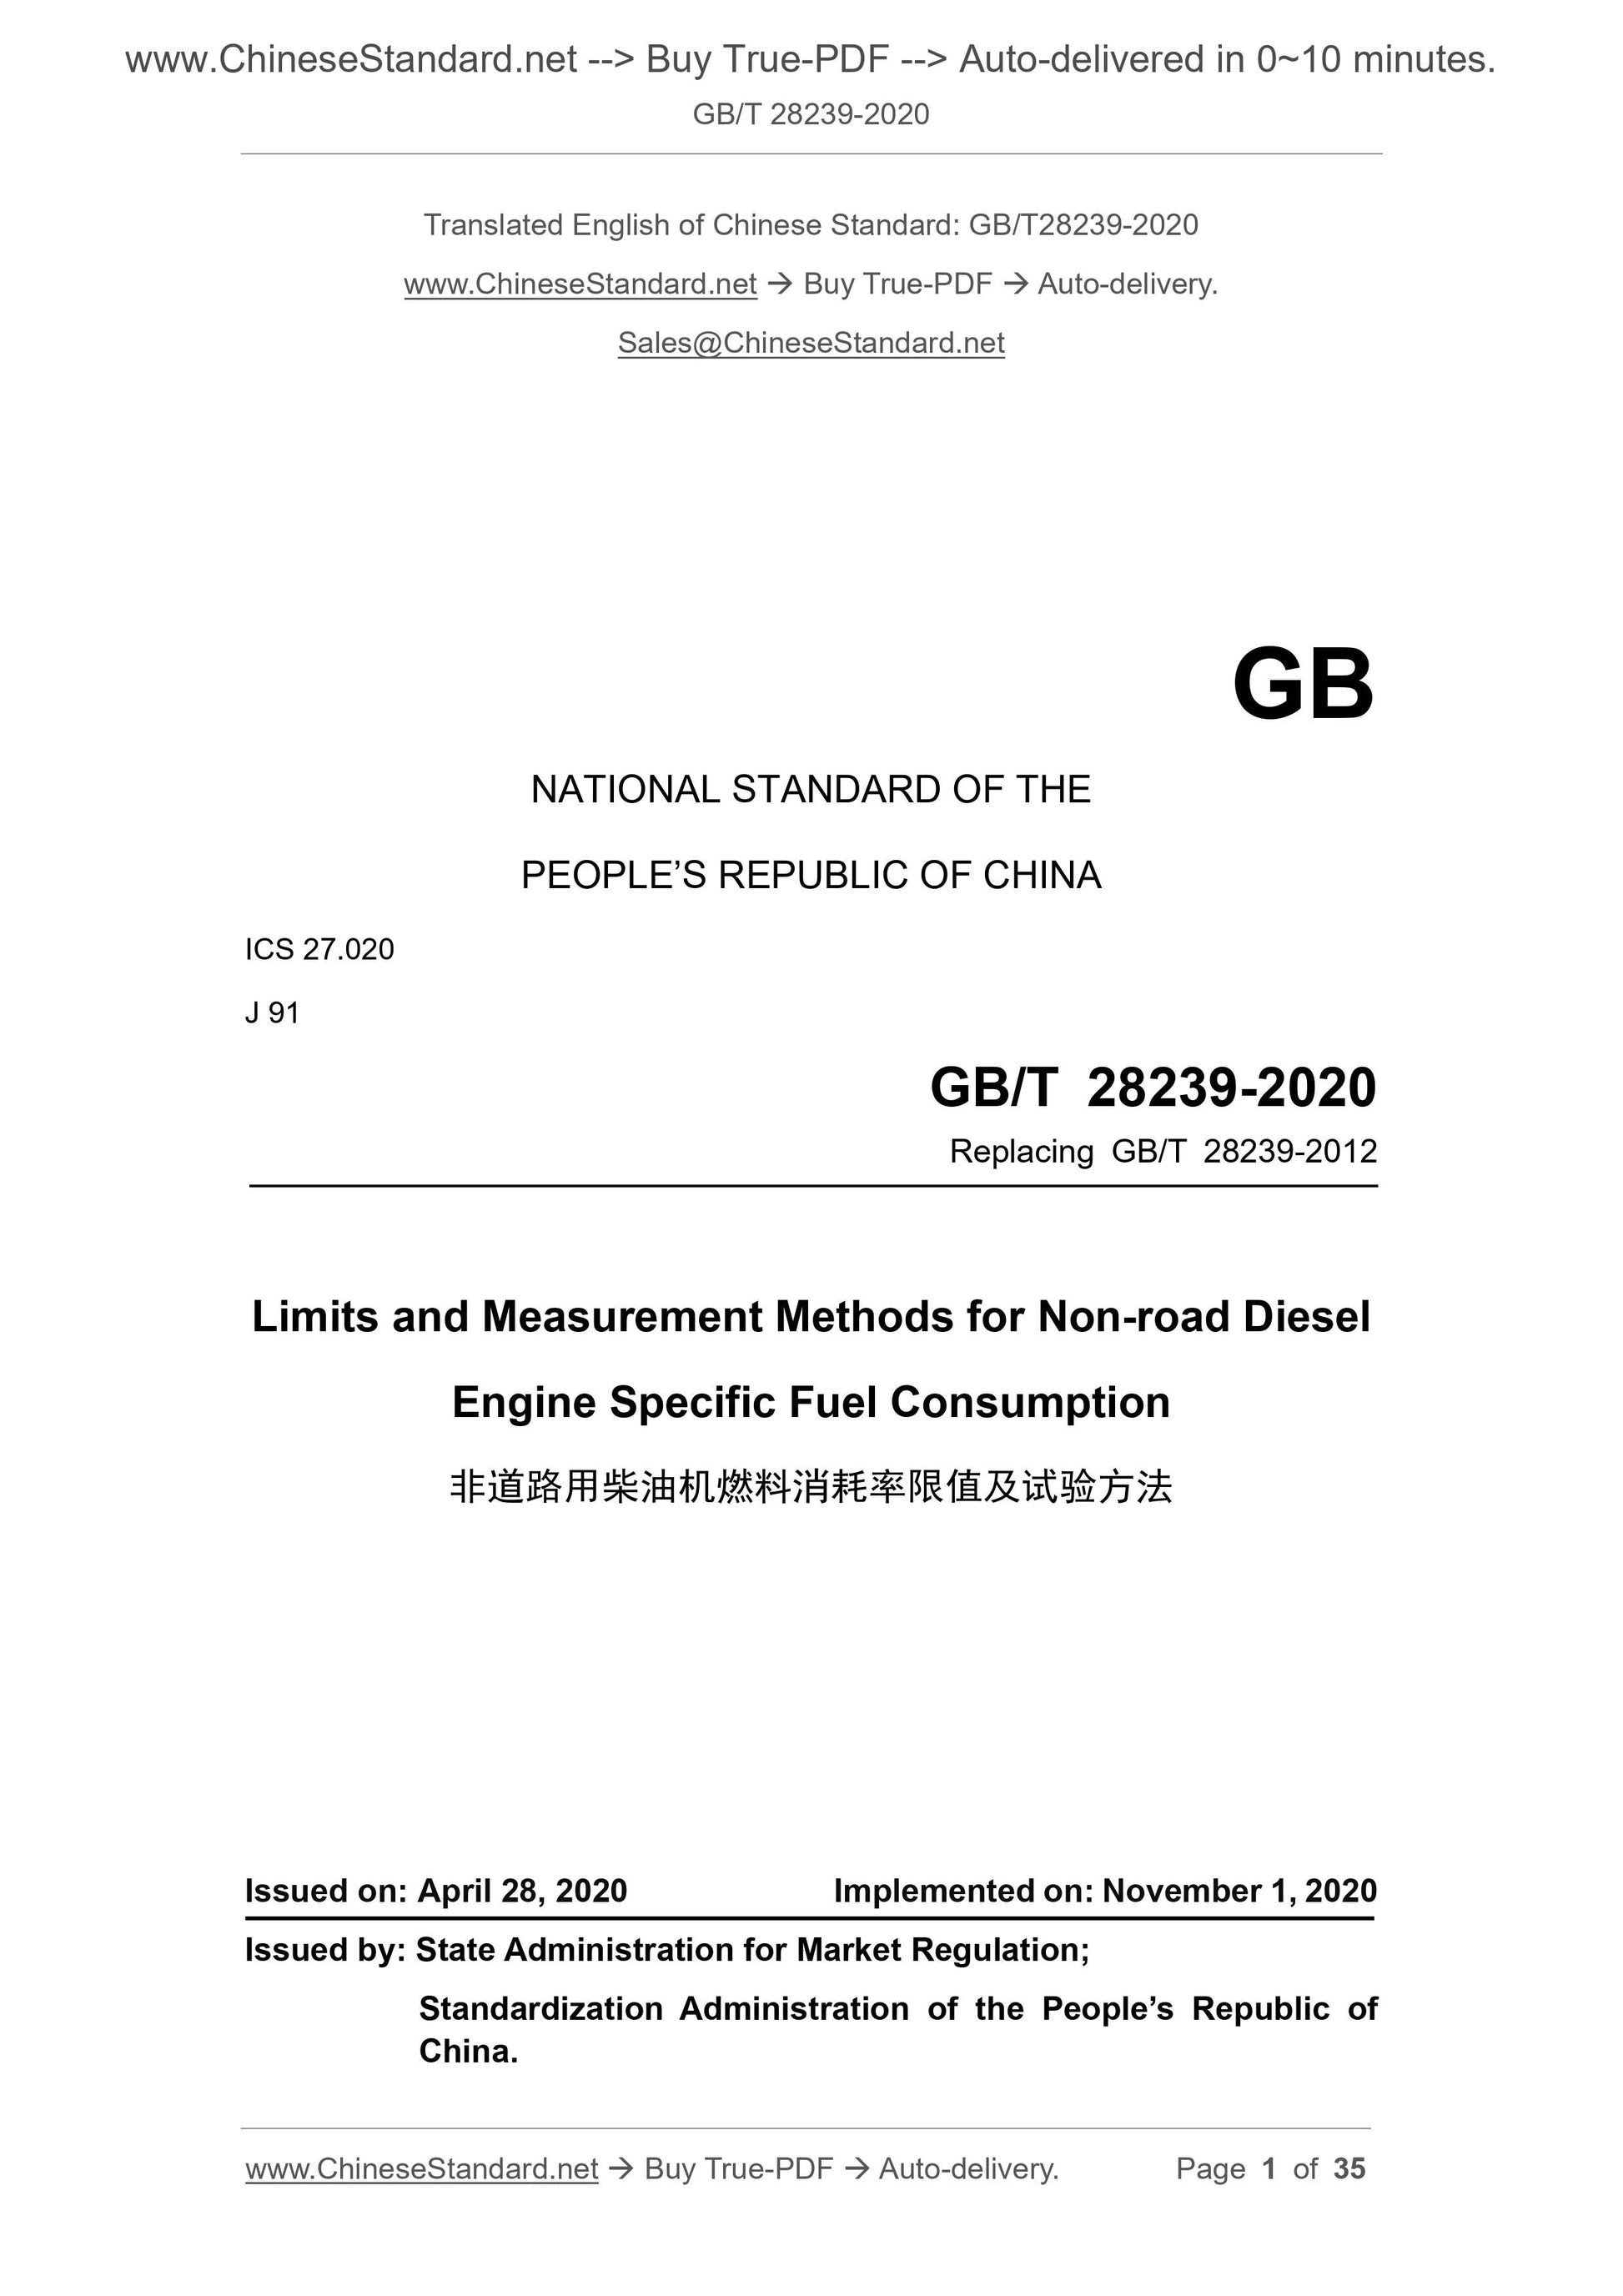 GB/T 28239-2020 Page 1